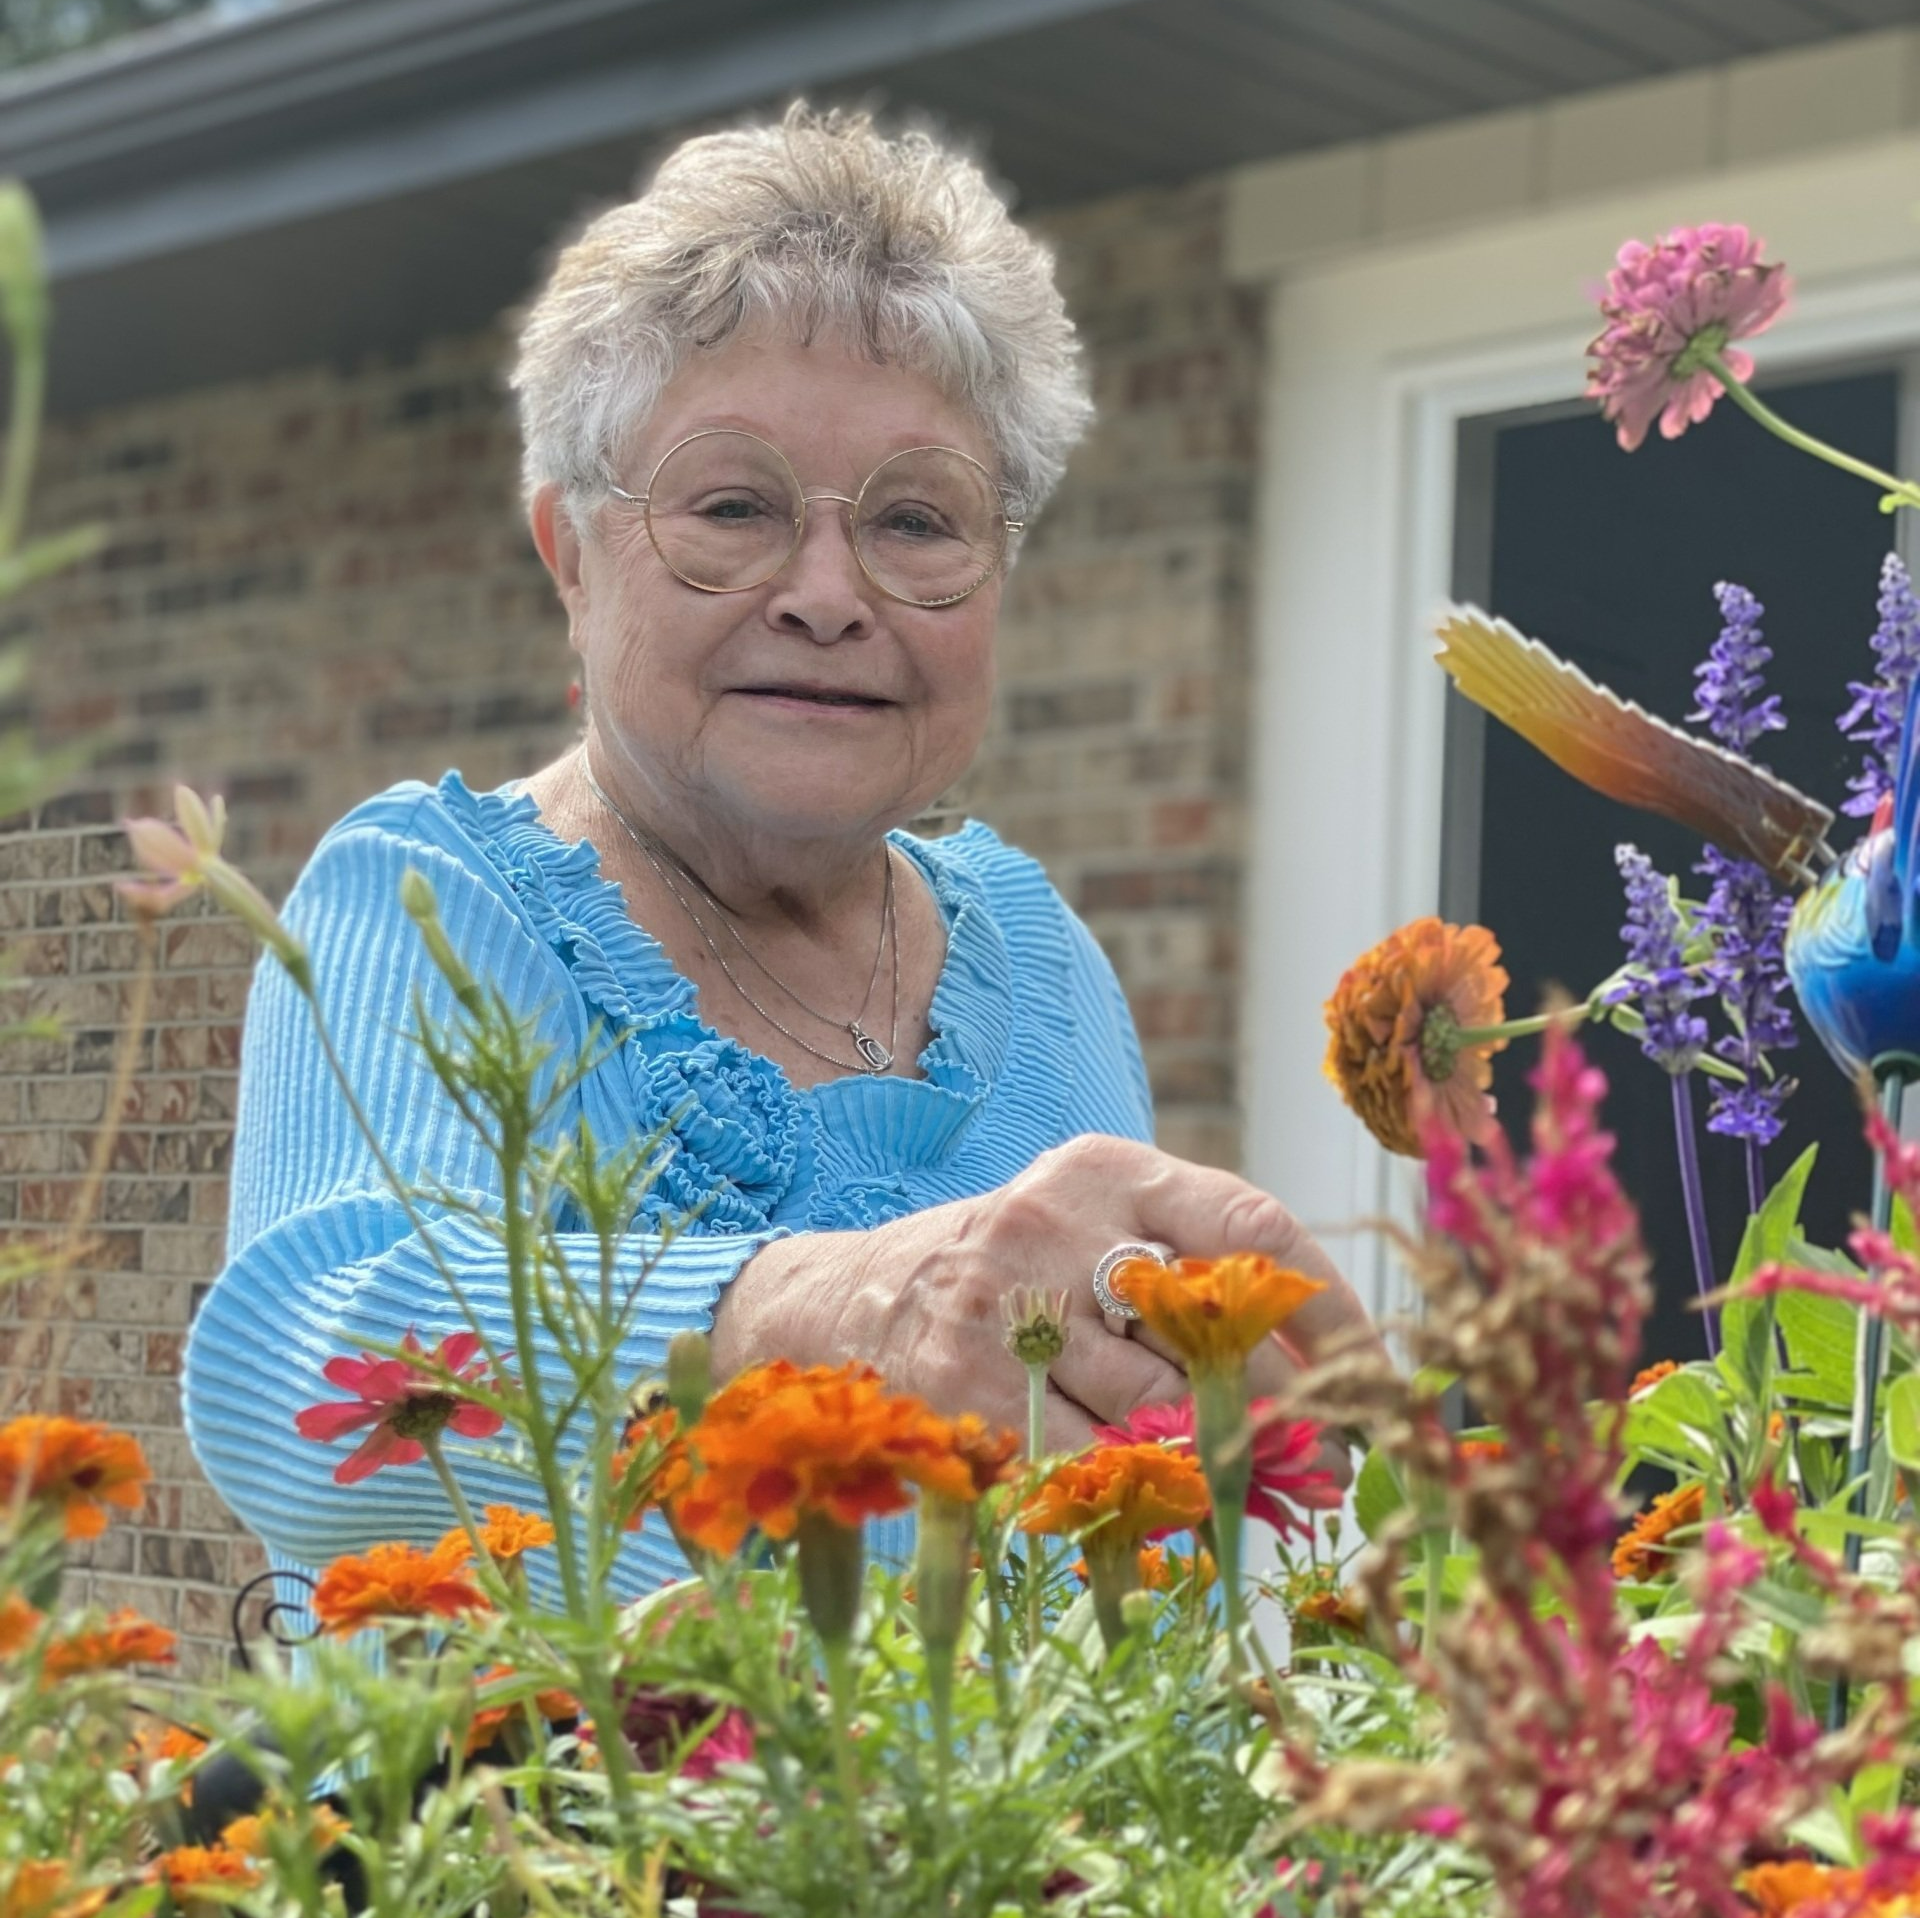 women living independently tending to her flowers at senior living community